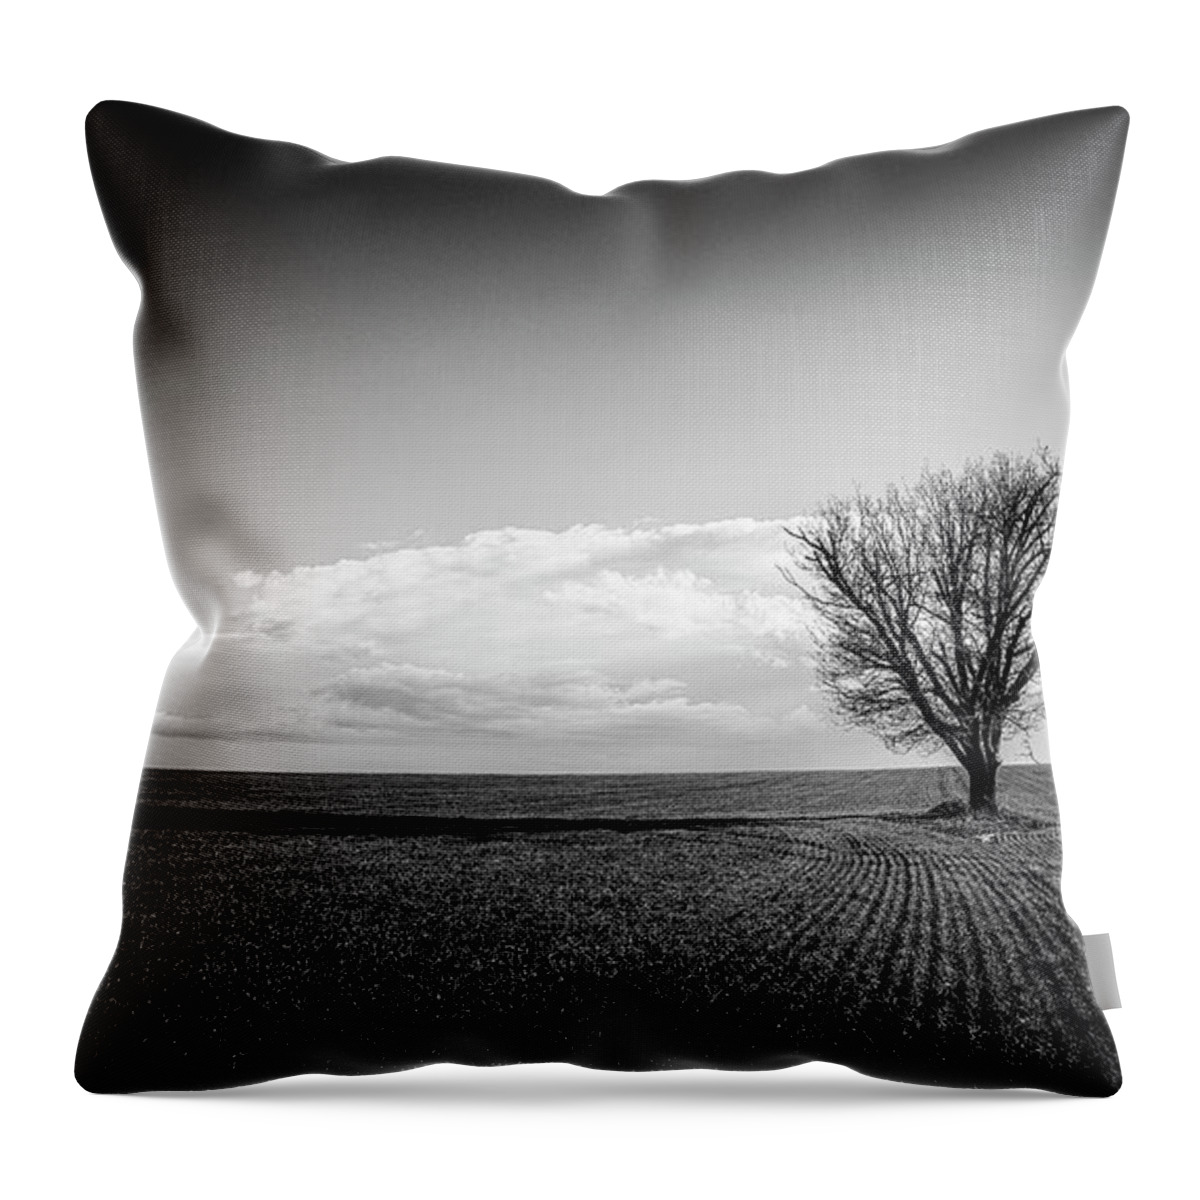 Alone Throw Pillow featuring the photograph Alone 05/12/2017 by Plamen Petkov